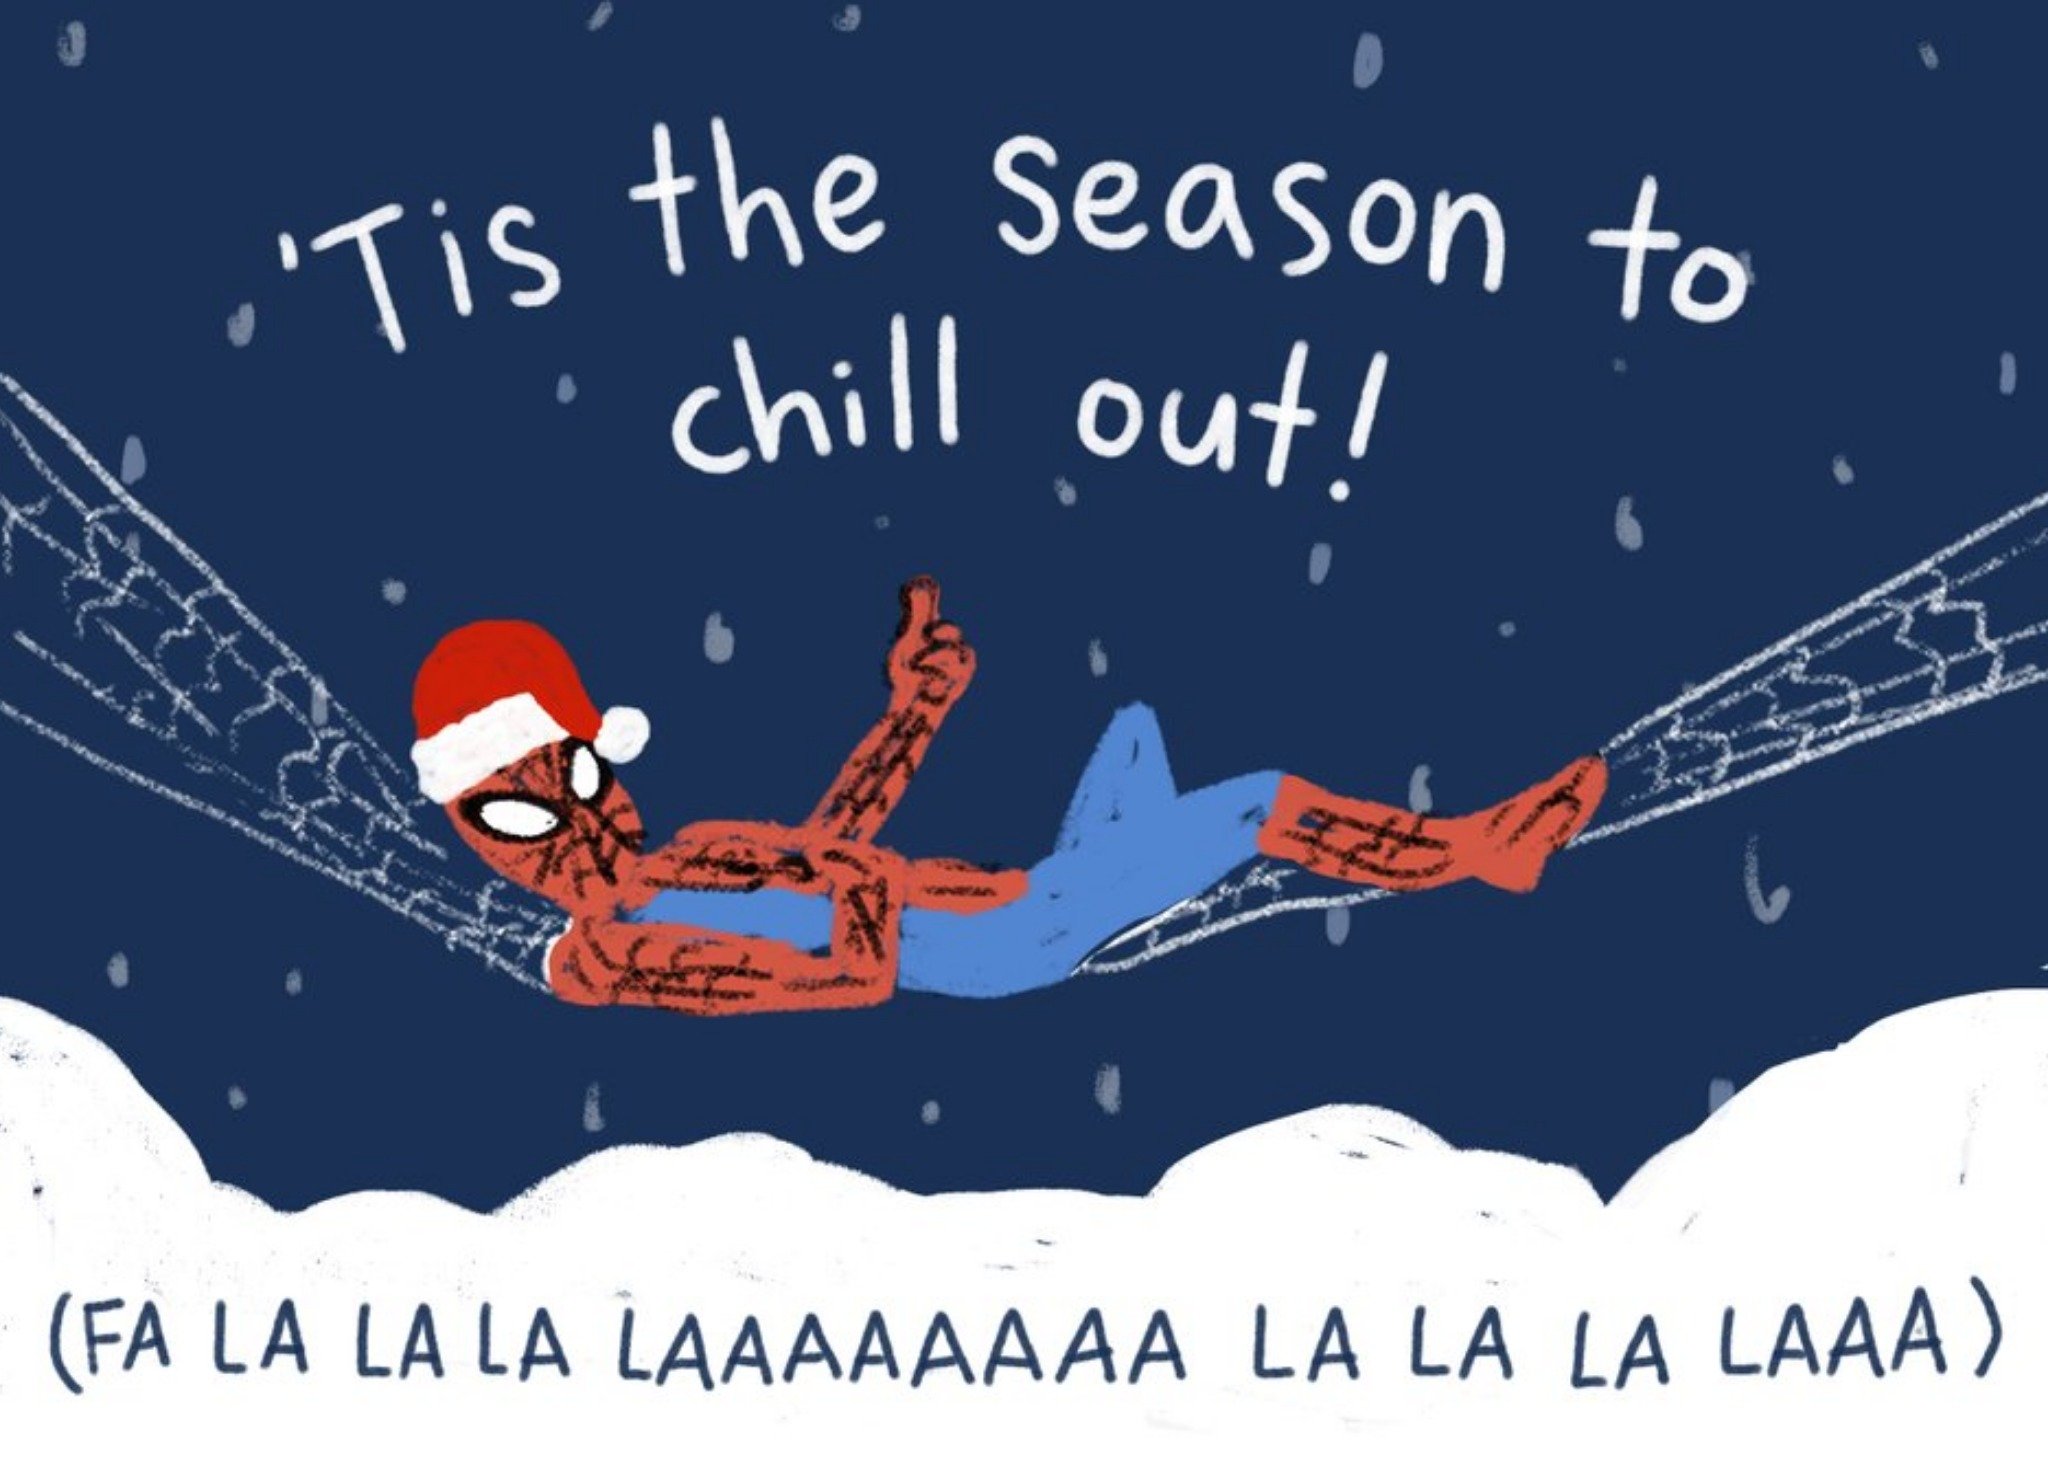 Marvel Spiderman Tis The Season To Chill Out Christmas Card Ecard